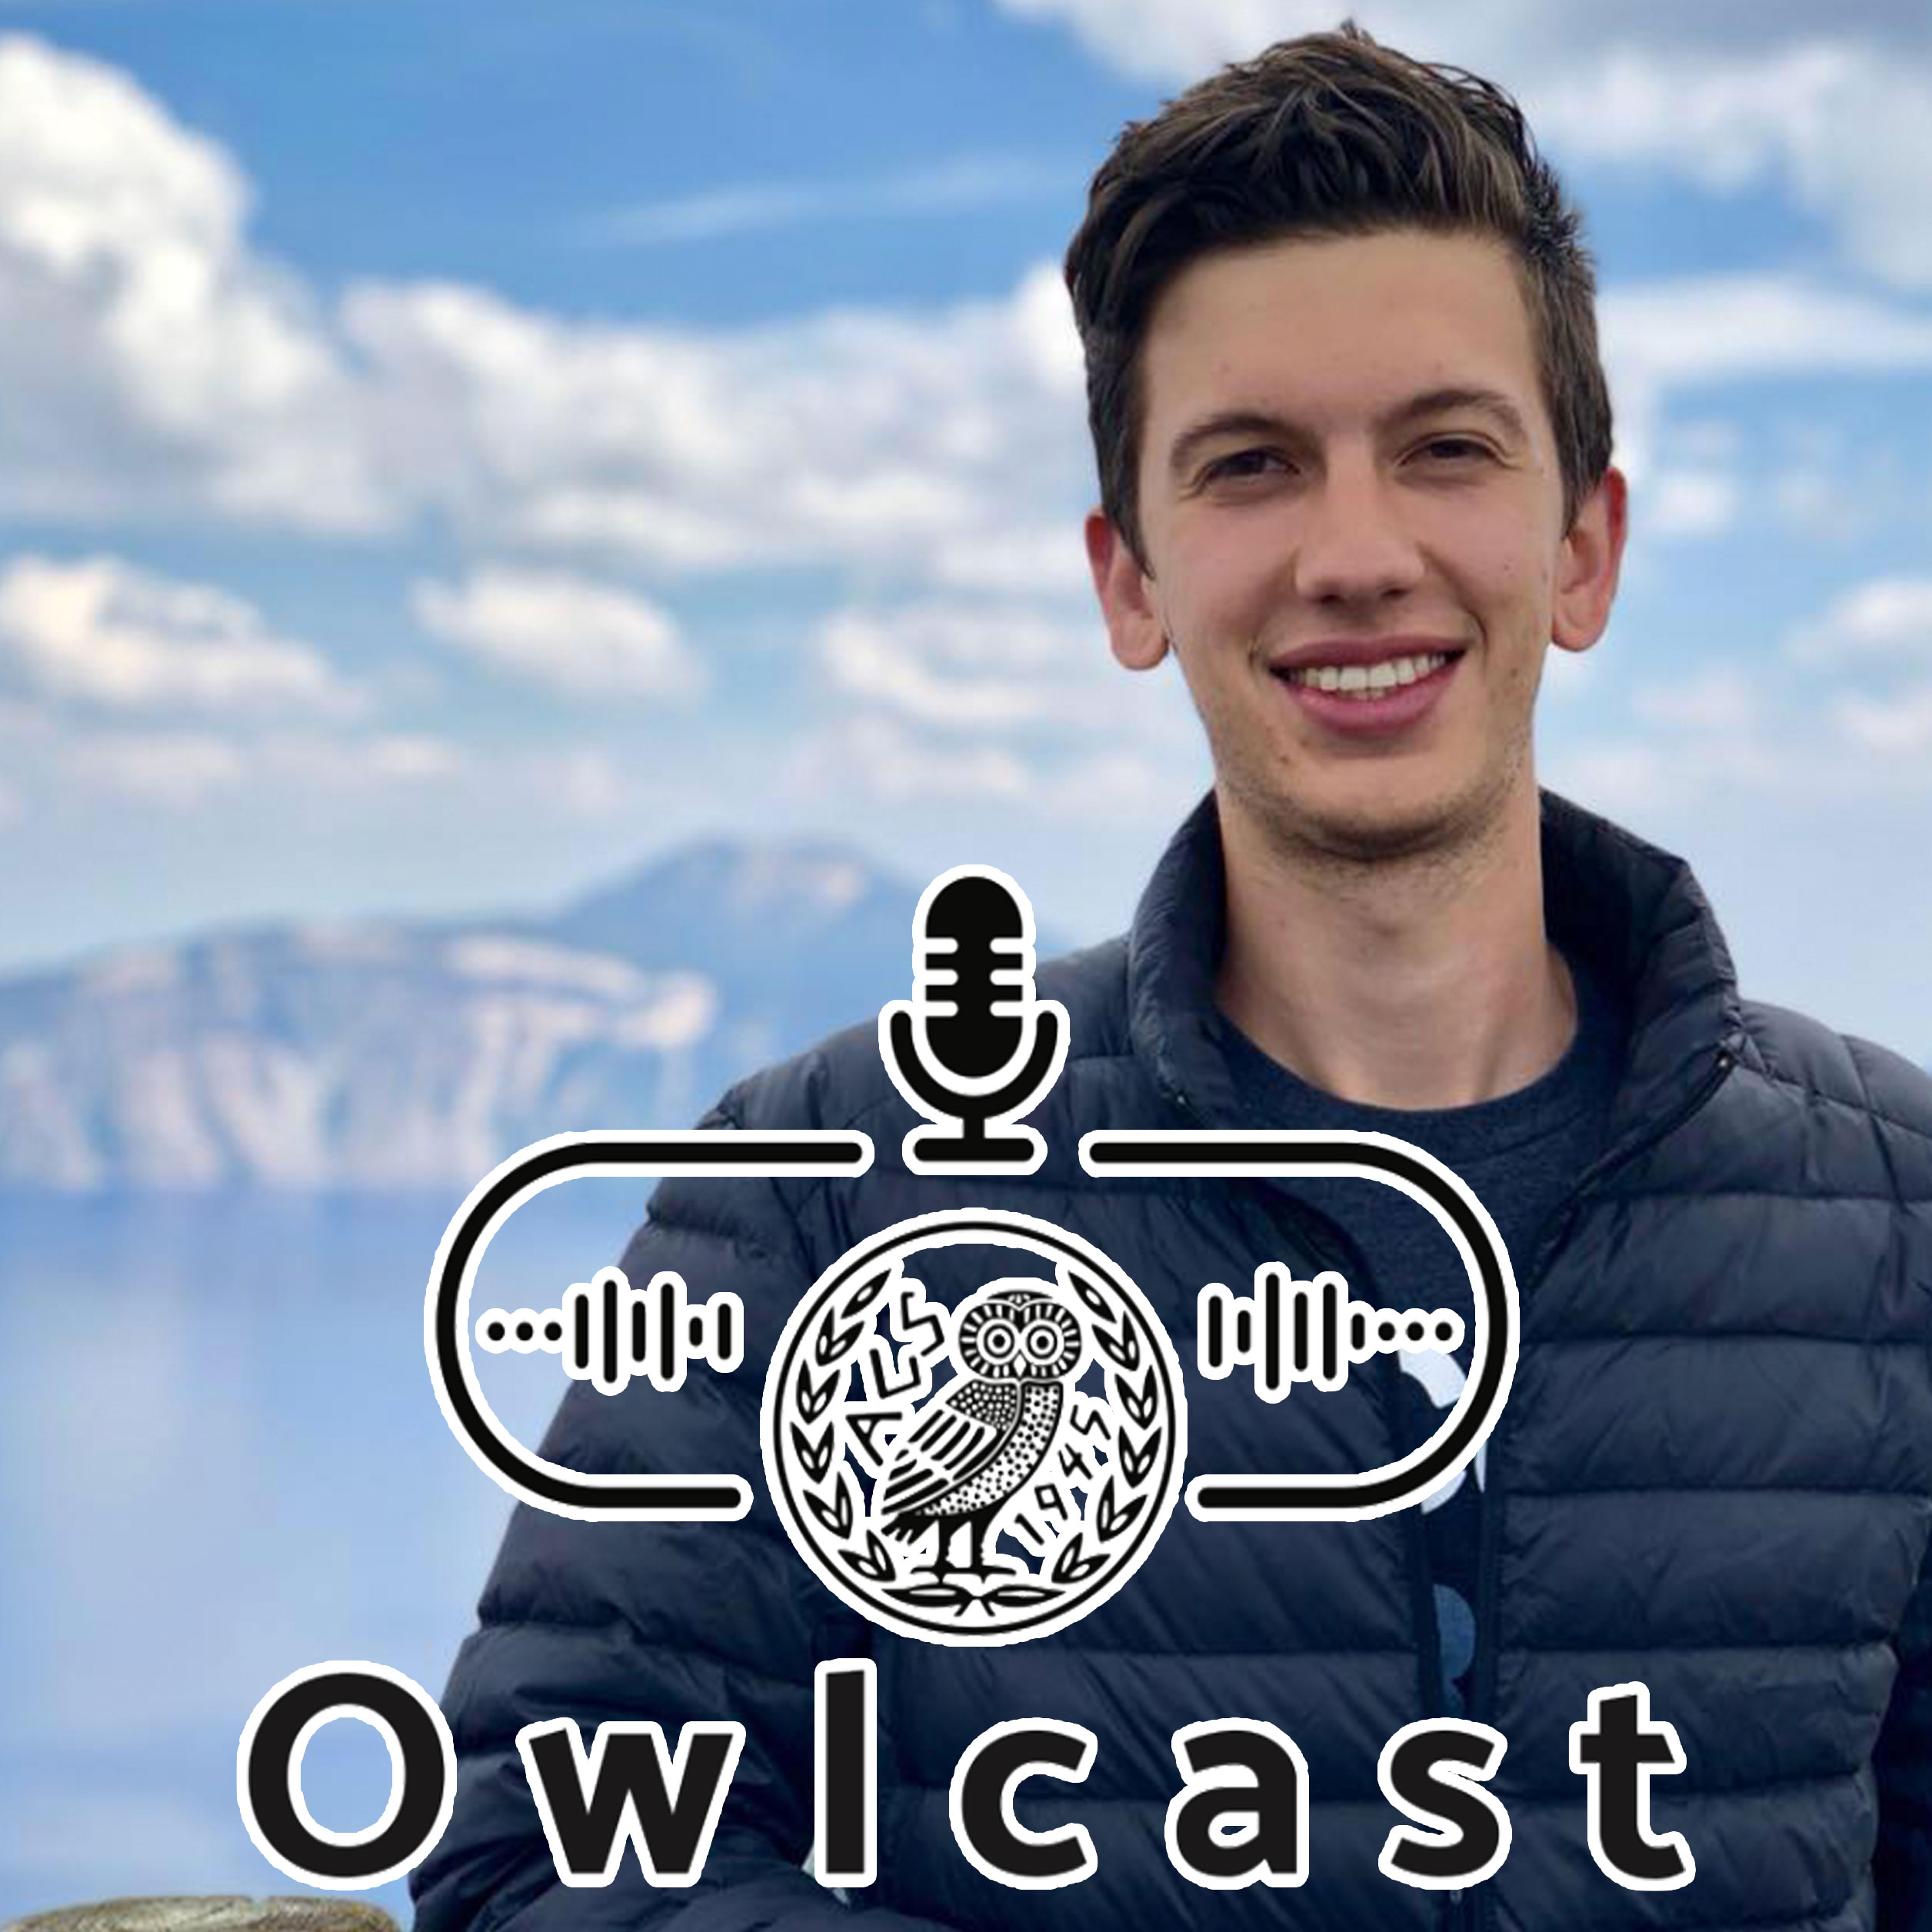 Owlcast 96 - Alumni Edition w/Alex Stelea (2012) • Kindling curiosity in school and approaching higher education with an open mind